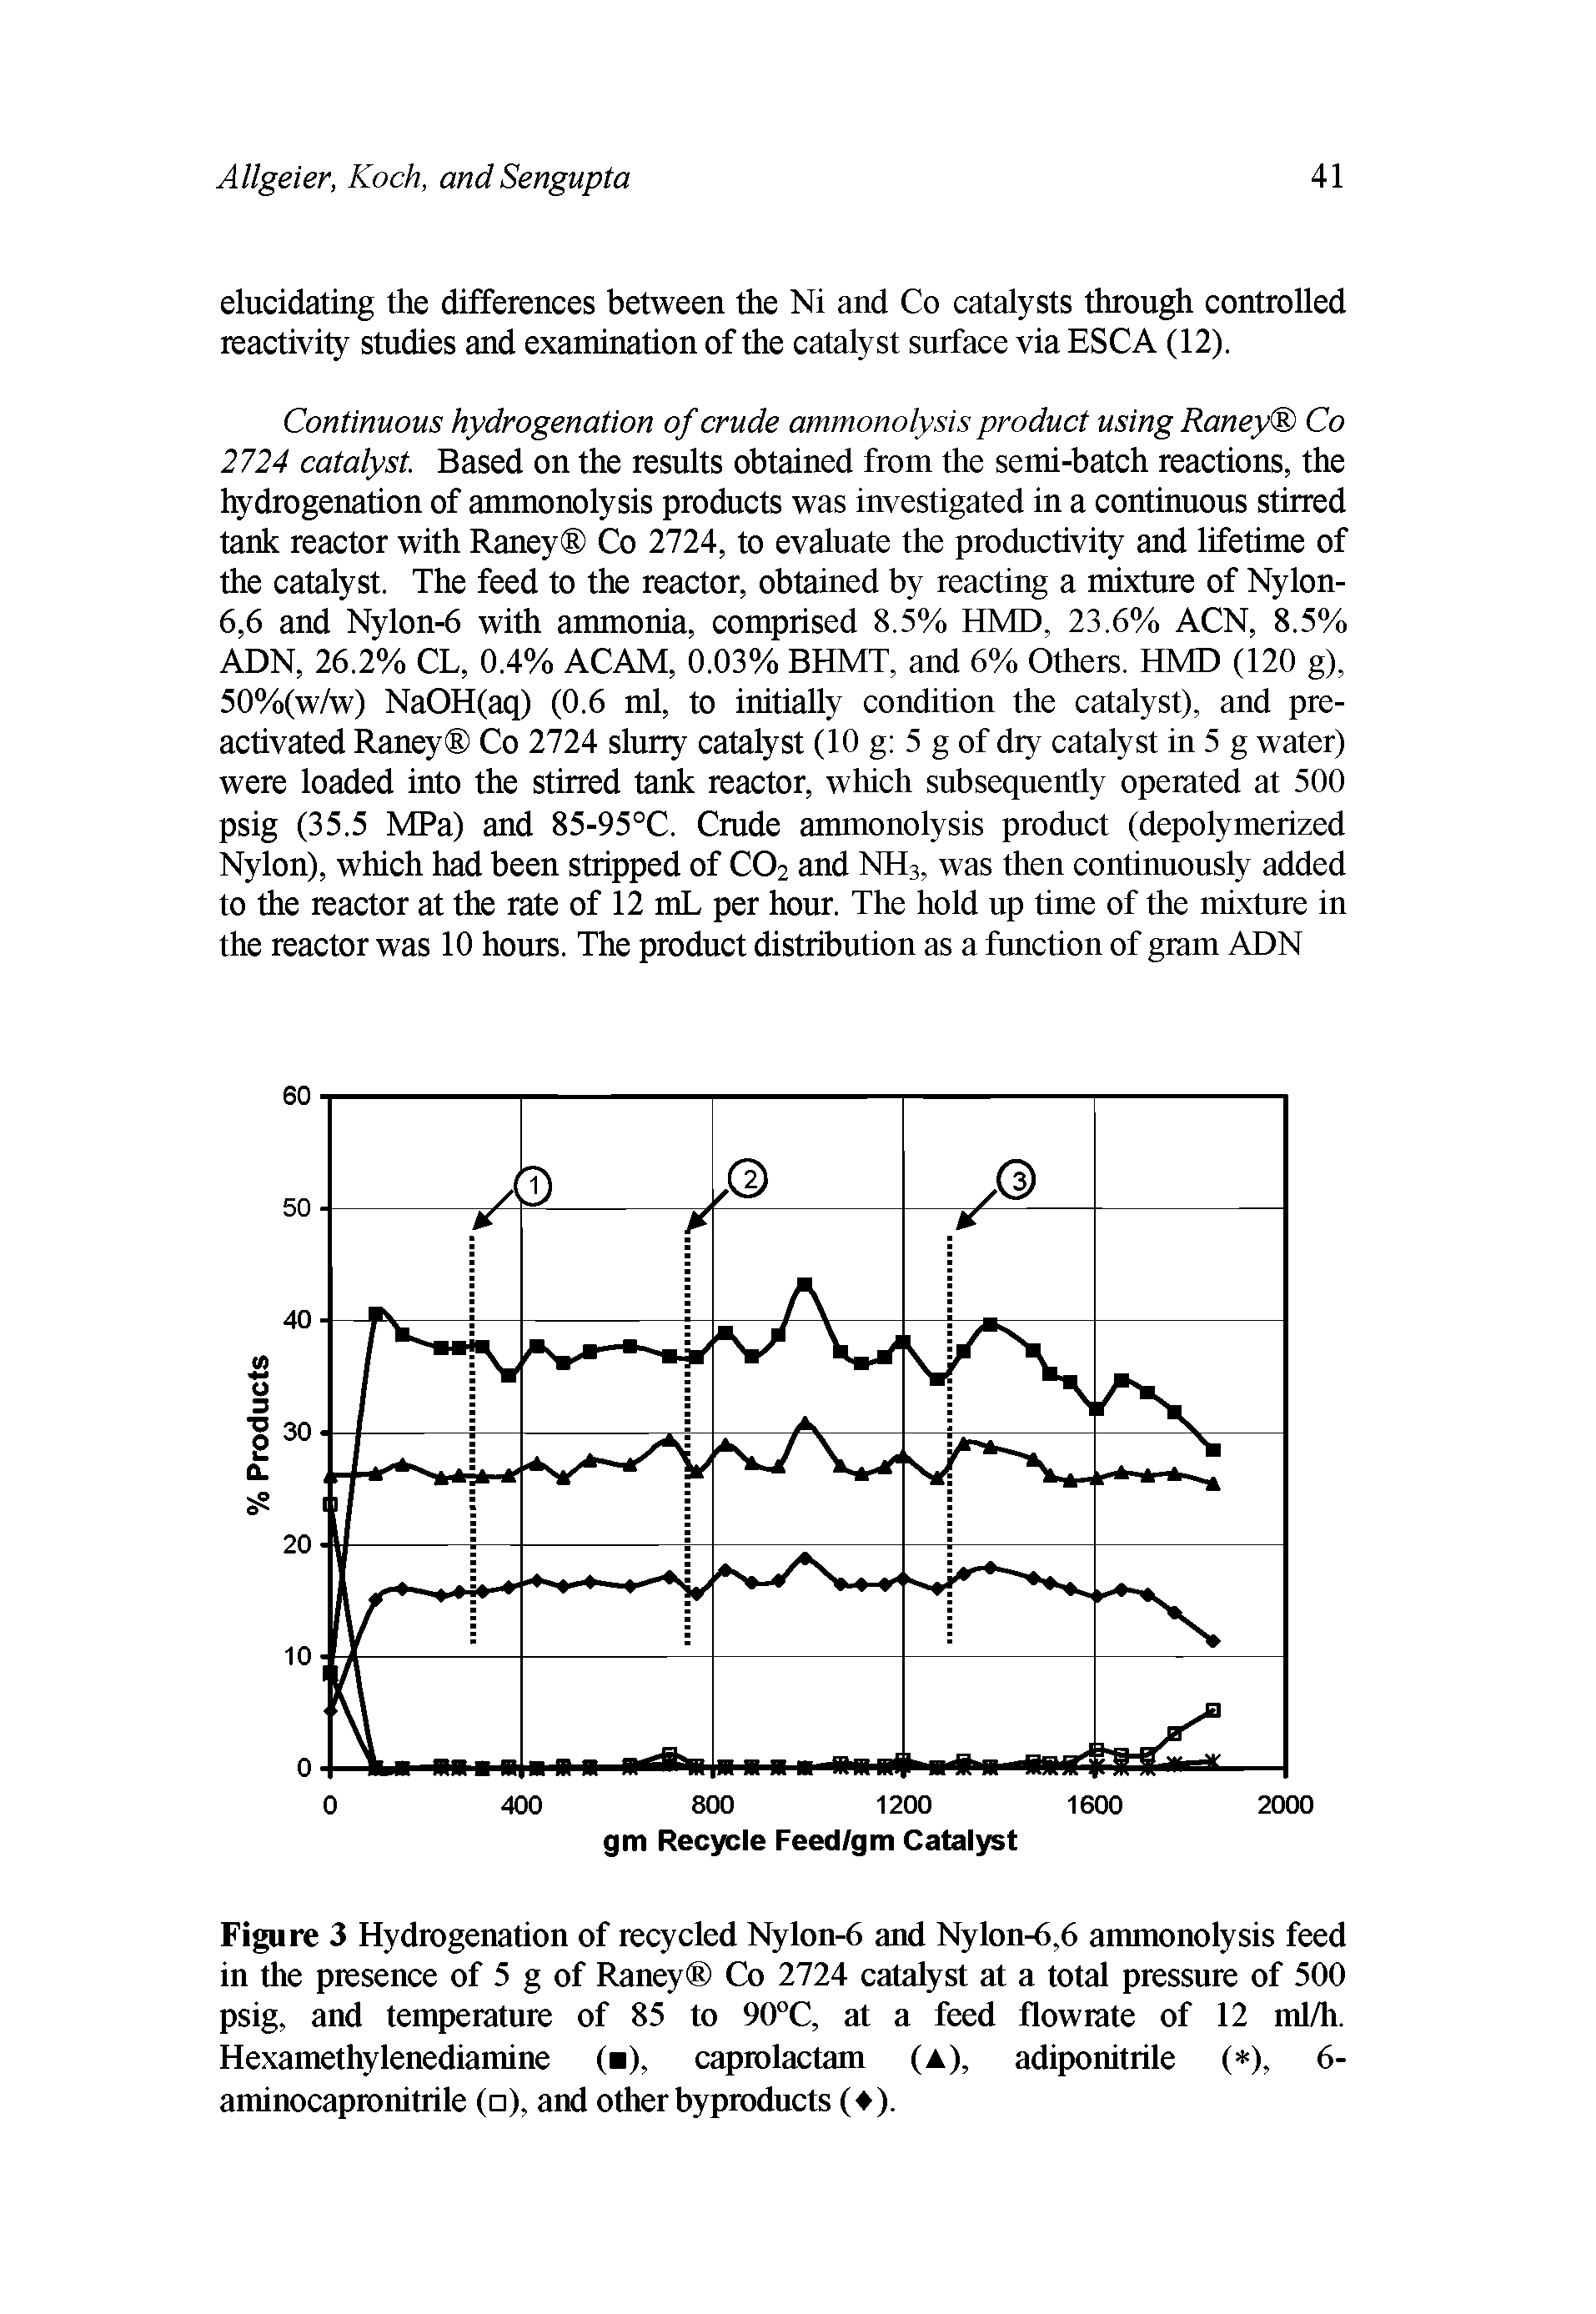 Figure 3 Hydrogenation of recycled Nylon-6 and Nylon-6,6 ammonolysis feed in the presence of 5 g of Raney Co 2724 catalyst at a total pressure of 500 psig, and temperature of 85 to 90°C, at a feed flowrate of 12 ml/h. Hexamethylenediamine ( ), caprolactam (A), adiponitrile ( ), 6-...